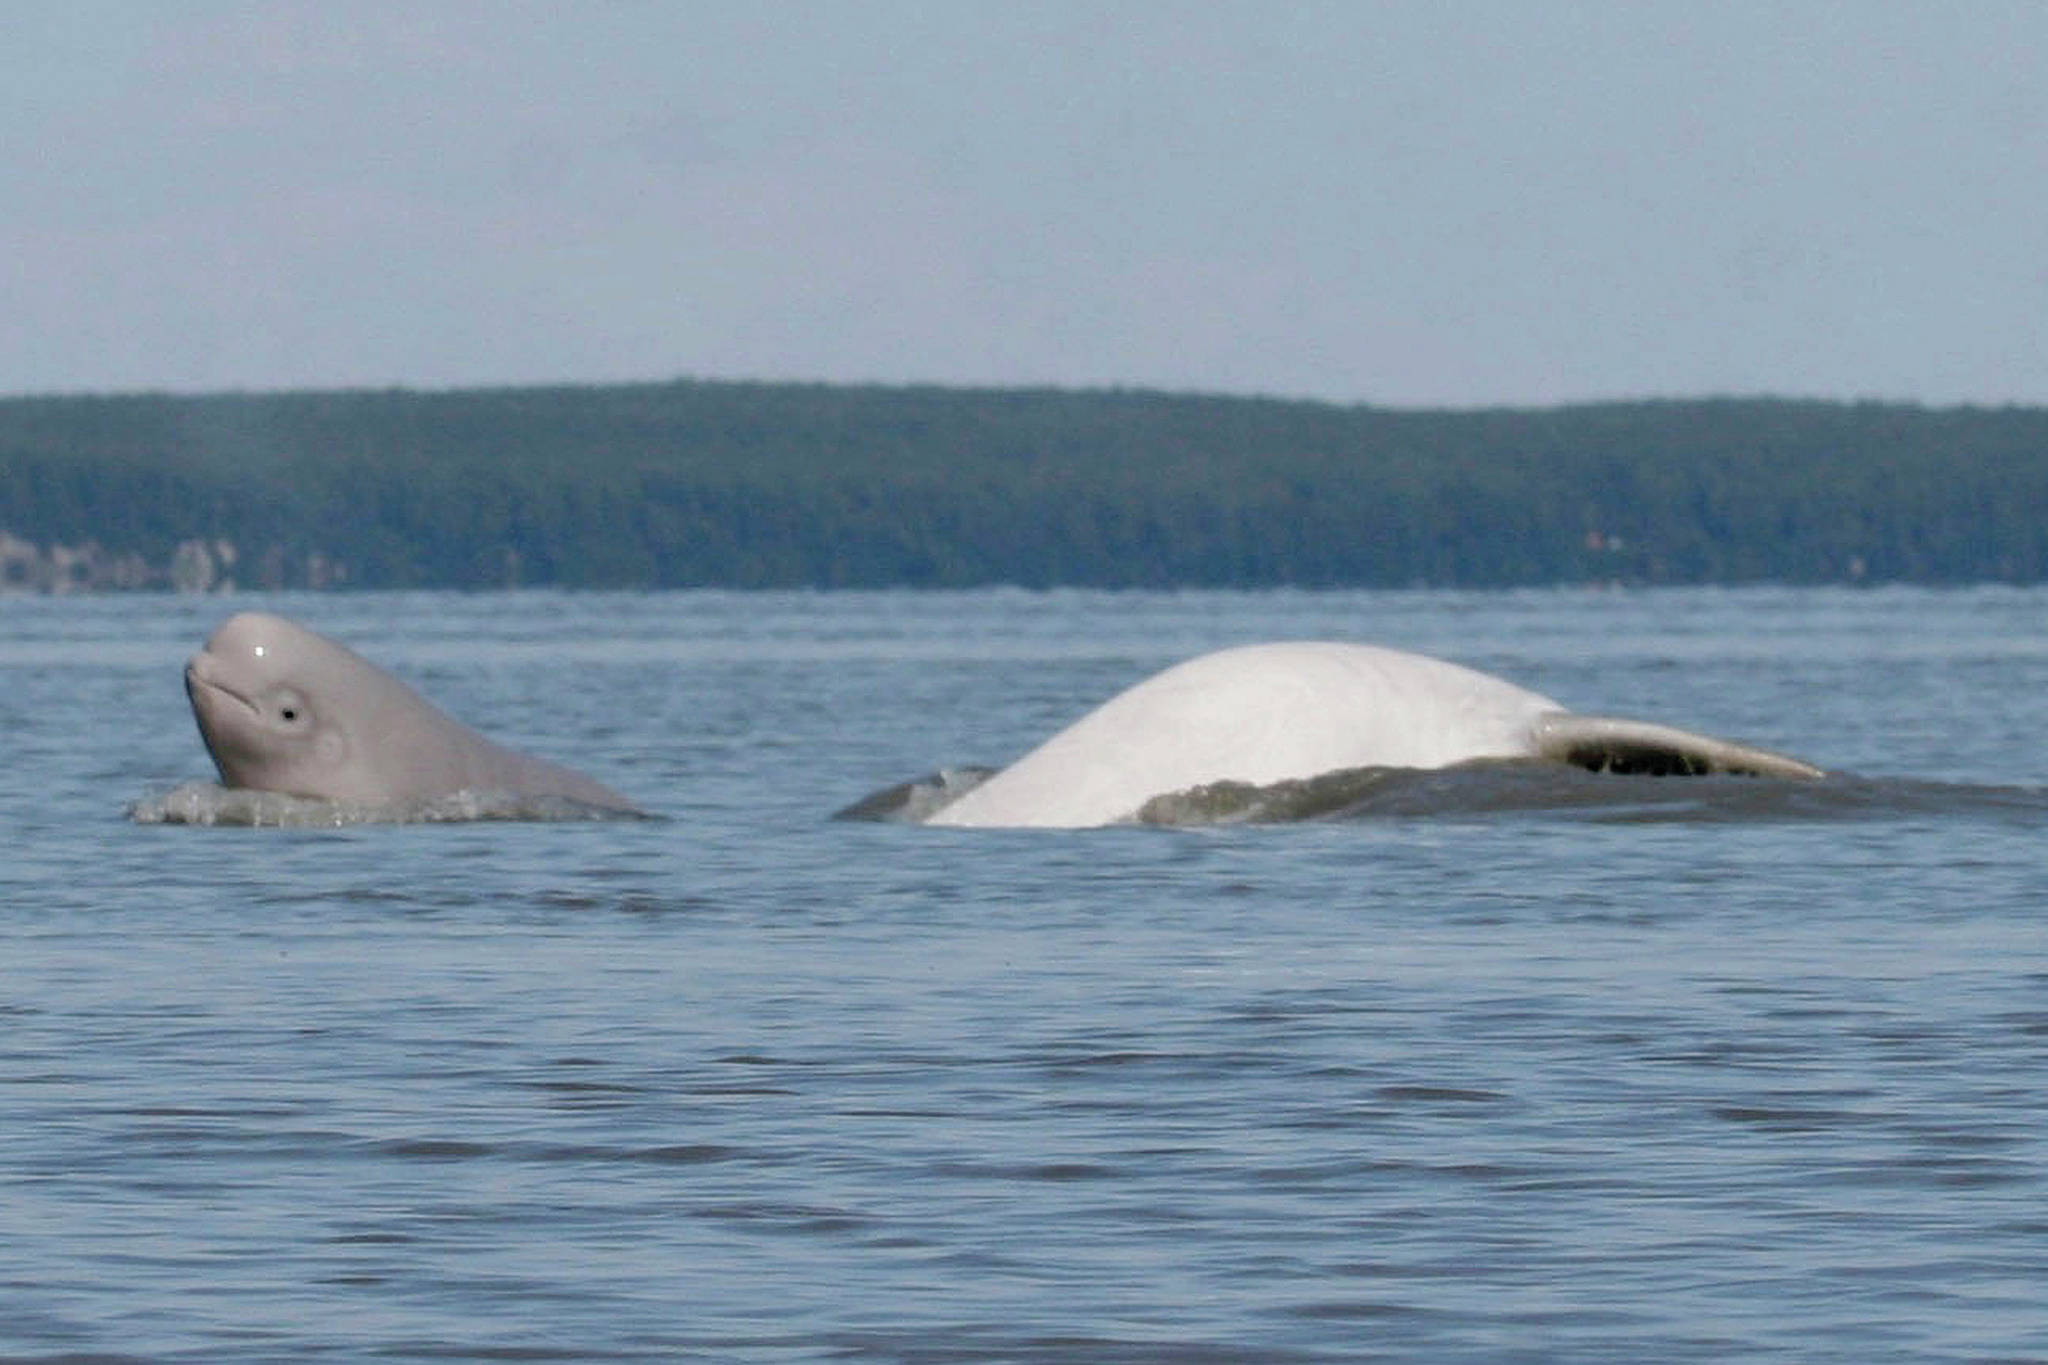 FILE- In this August 2009, file photo, provided by the Department of Defense, a Cook Inlet beluga whale calf, left, and an adult breach near Anchorage, Alaska. Conservation groups are suing a federal agency over rules they say could harm beluga whales and other marine mammals in Alaska’s Cook Inlet. An attorney for the Center for Biological Diversity, which is challenging the rules along with Cook Inletkeeper, says the lawsuit was filed Wednesday, Sept. 4, 2019, against the National Marine Fisheries Service. The agency has said its analysis indicates that the rules will not contribute to or worsen the observed decline of the Cook Inlet beluga whale population. (Christopher Garner/Department of Defense via AP, File)